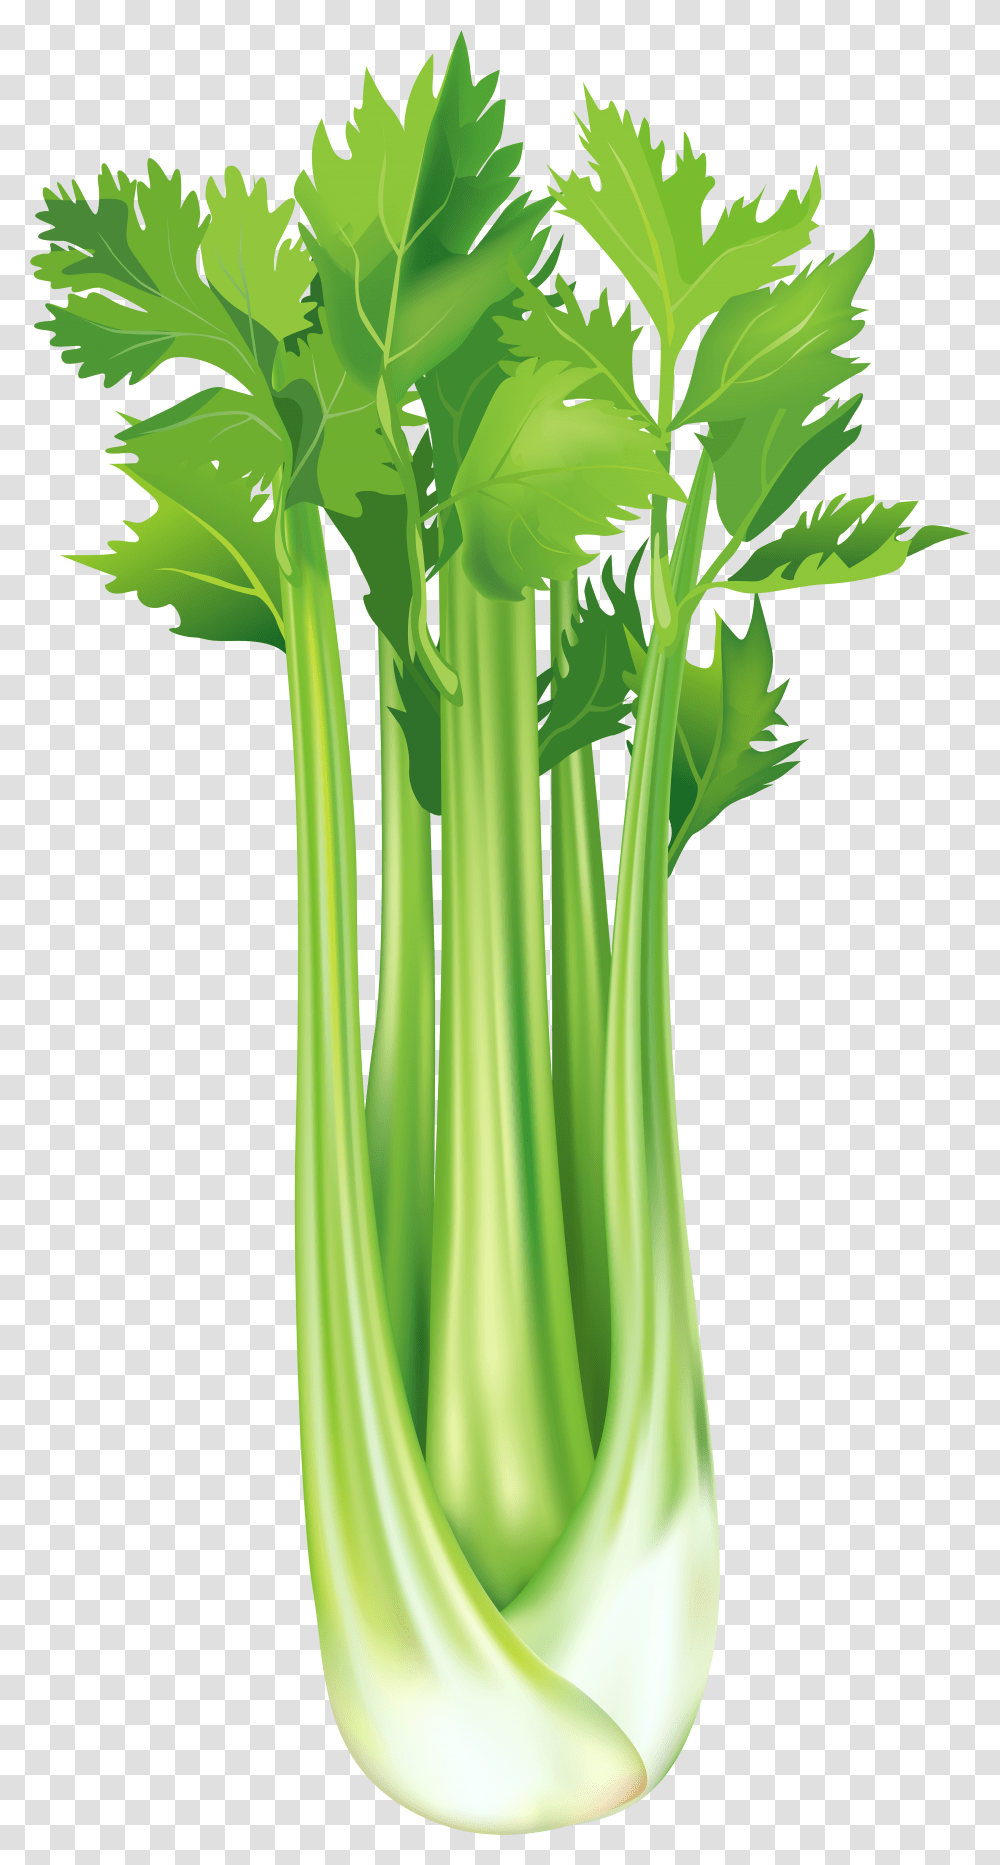 Green Onion And Celery Download Celery Clipart Transparent Png